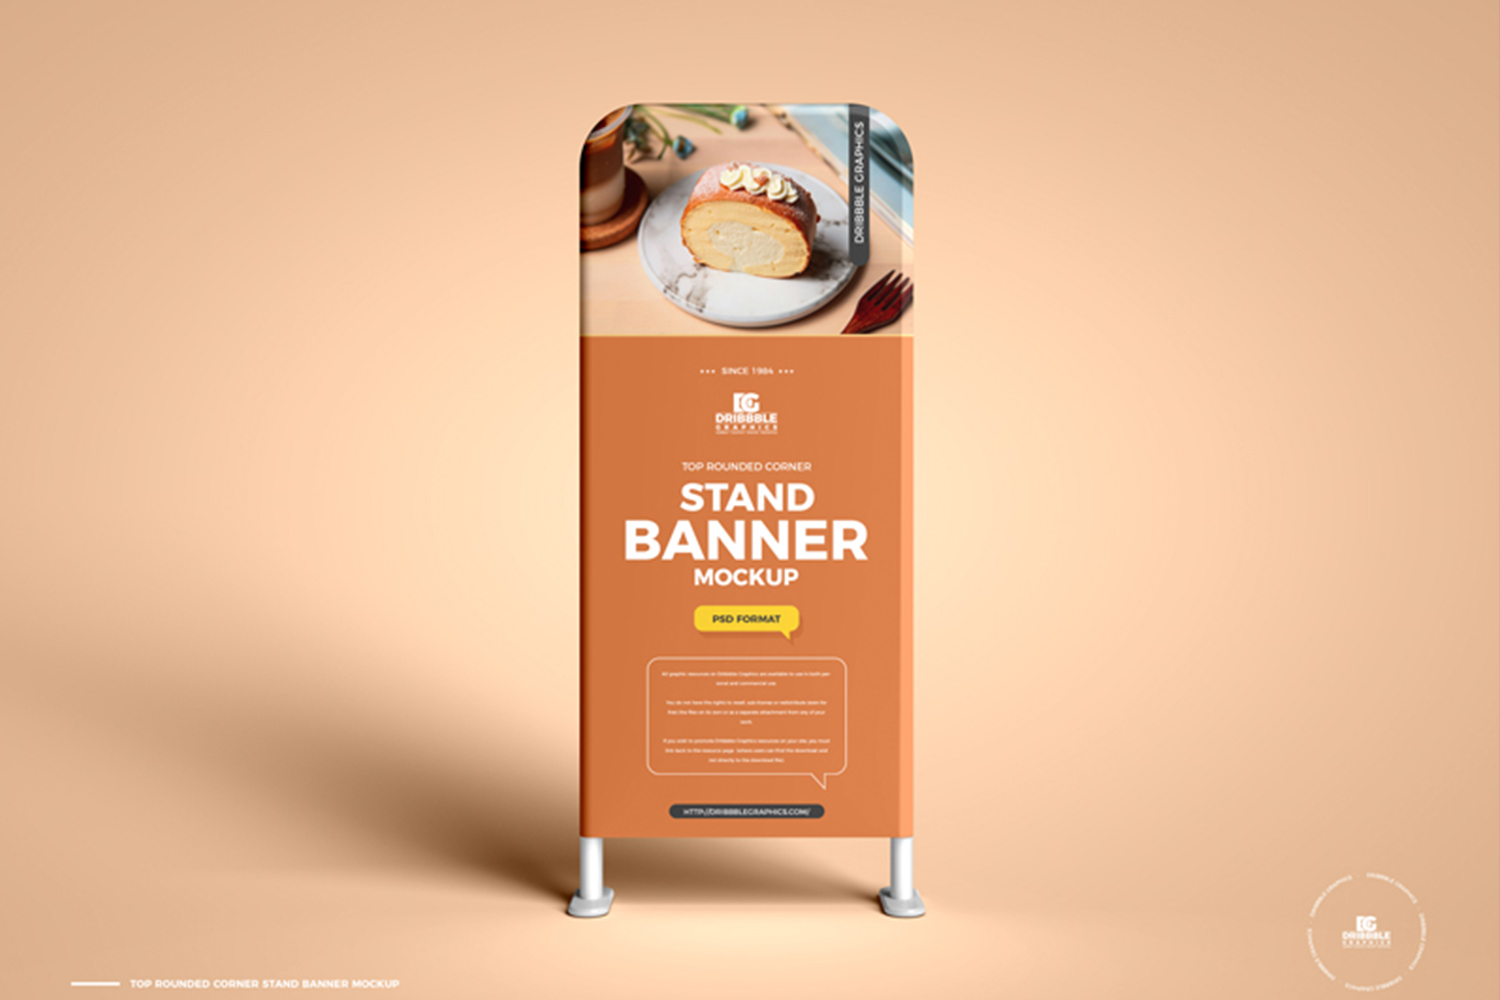 Top Rounded Corner Stand Banner Mockup Free Download